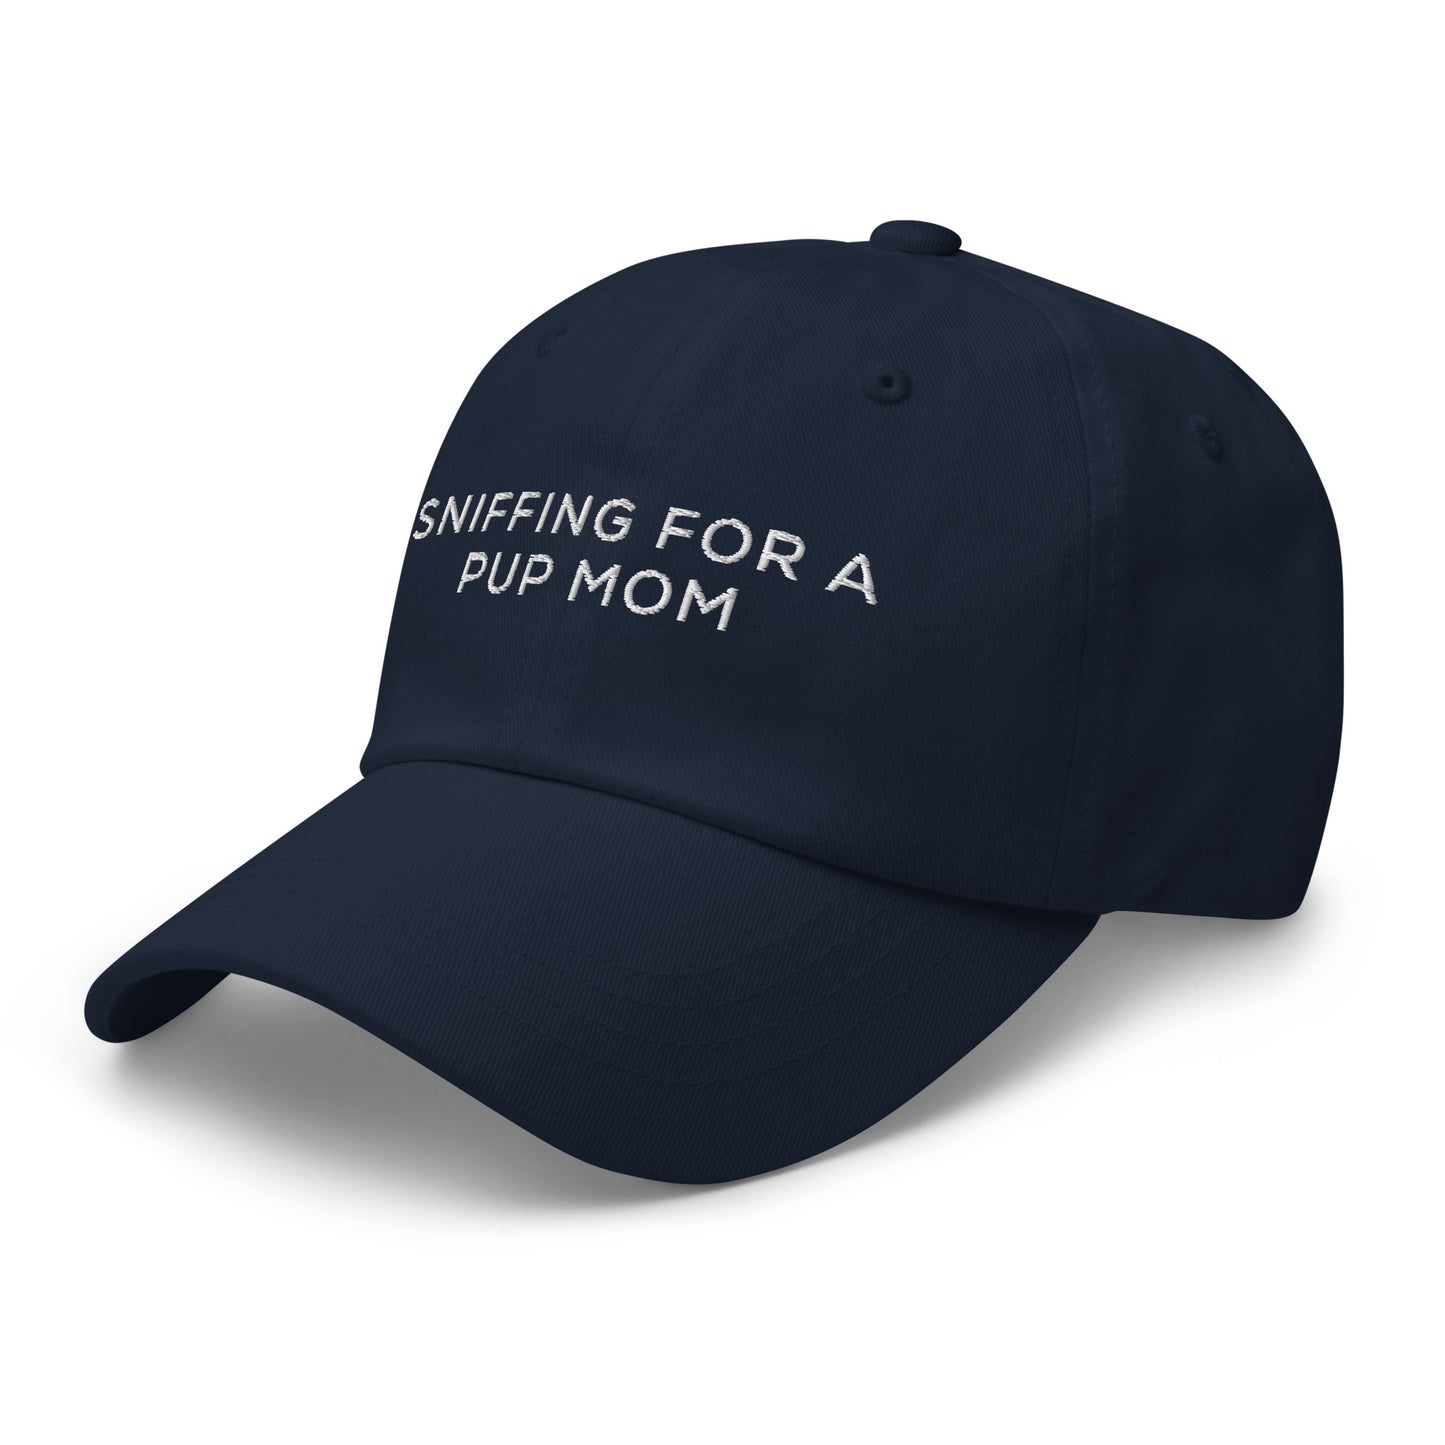 Sniffing for a Pup Mom Dad hat